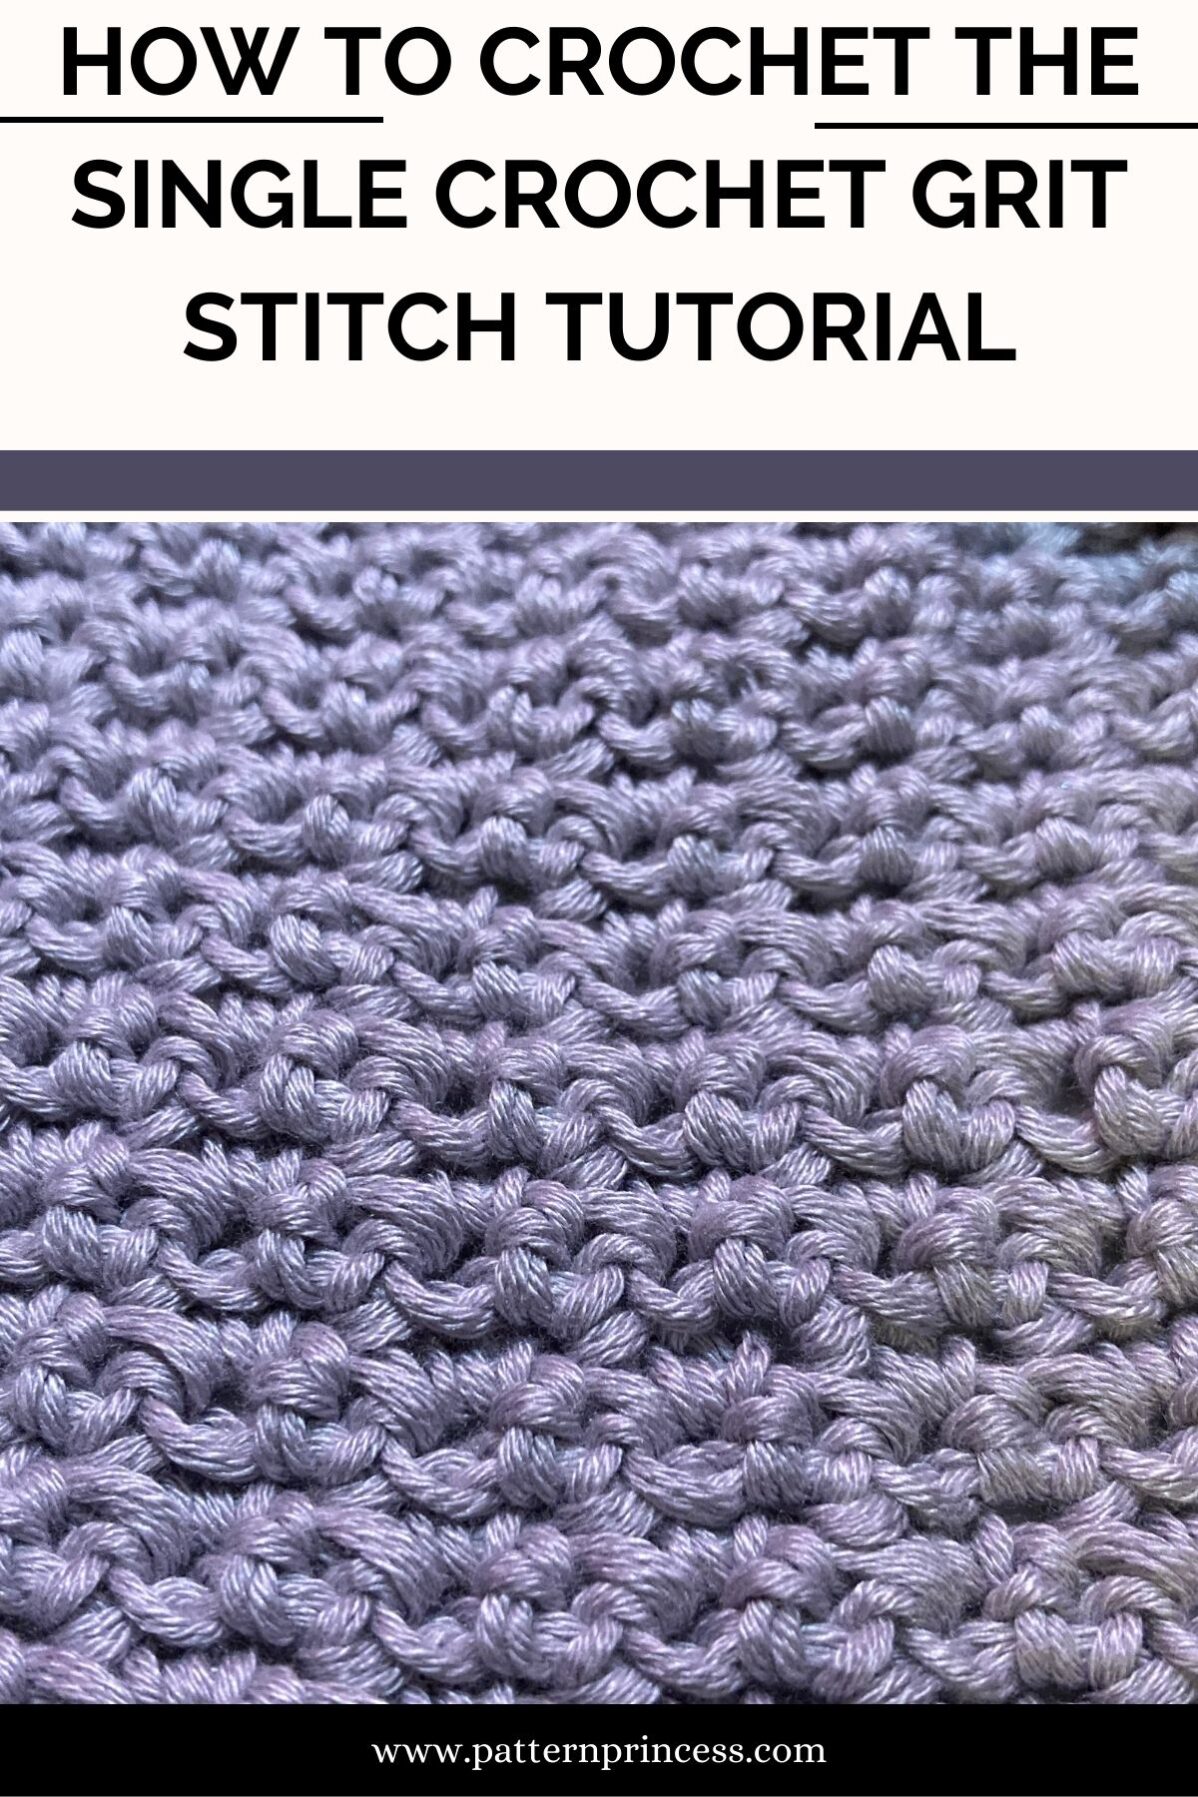 How to Crochet the Single Crochet Grit Stitch Tutorial